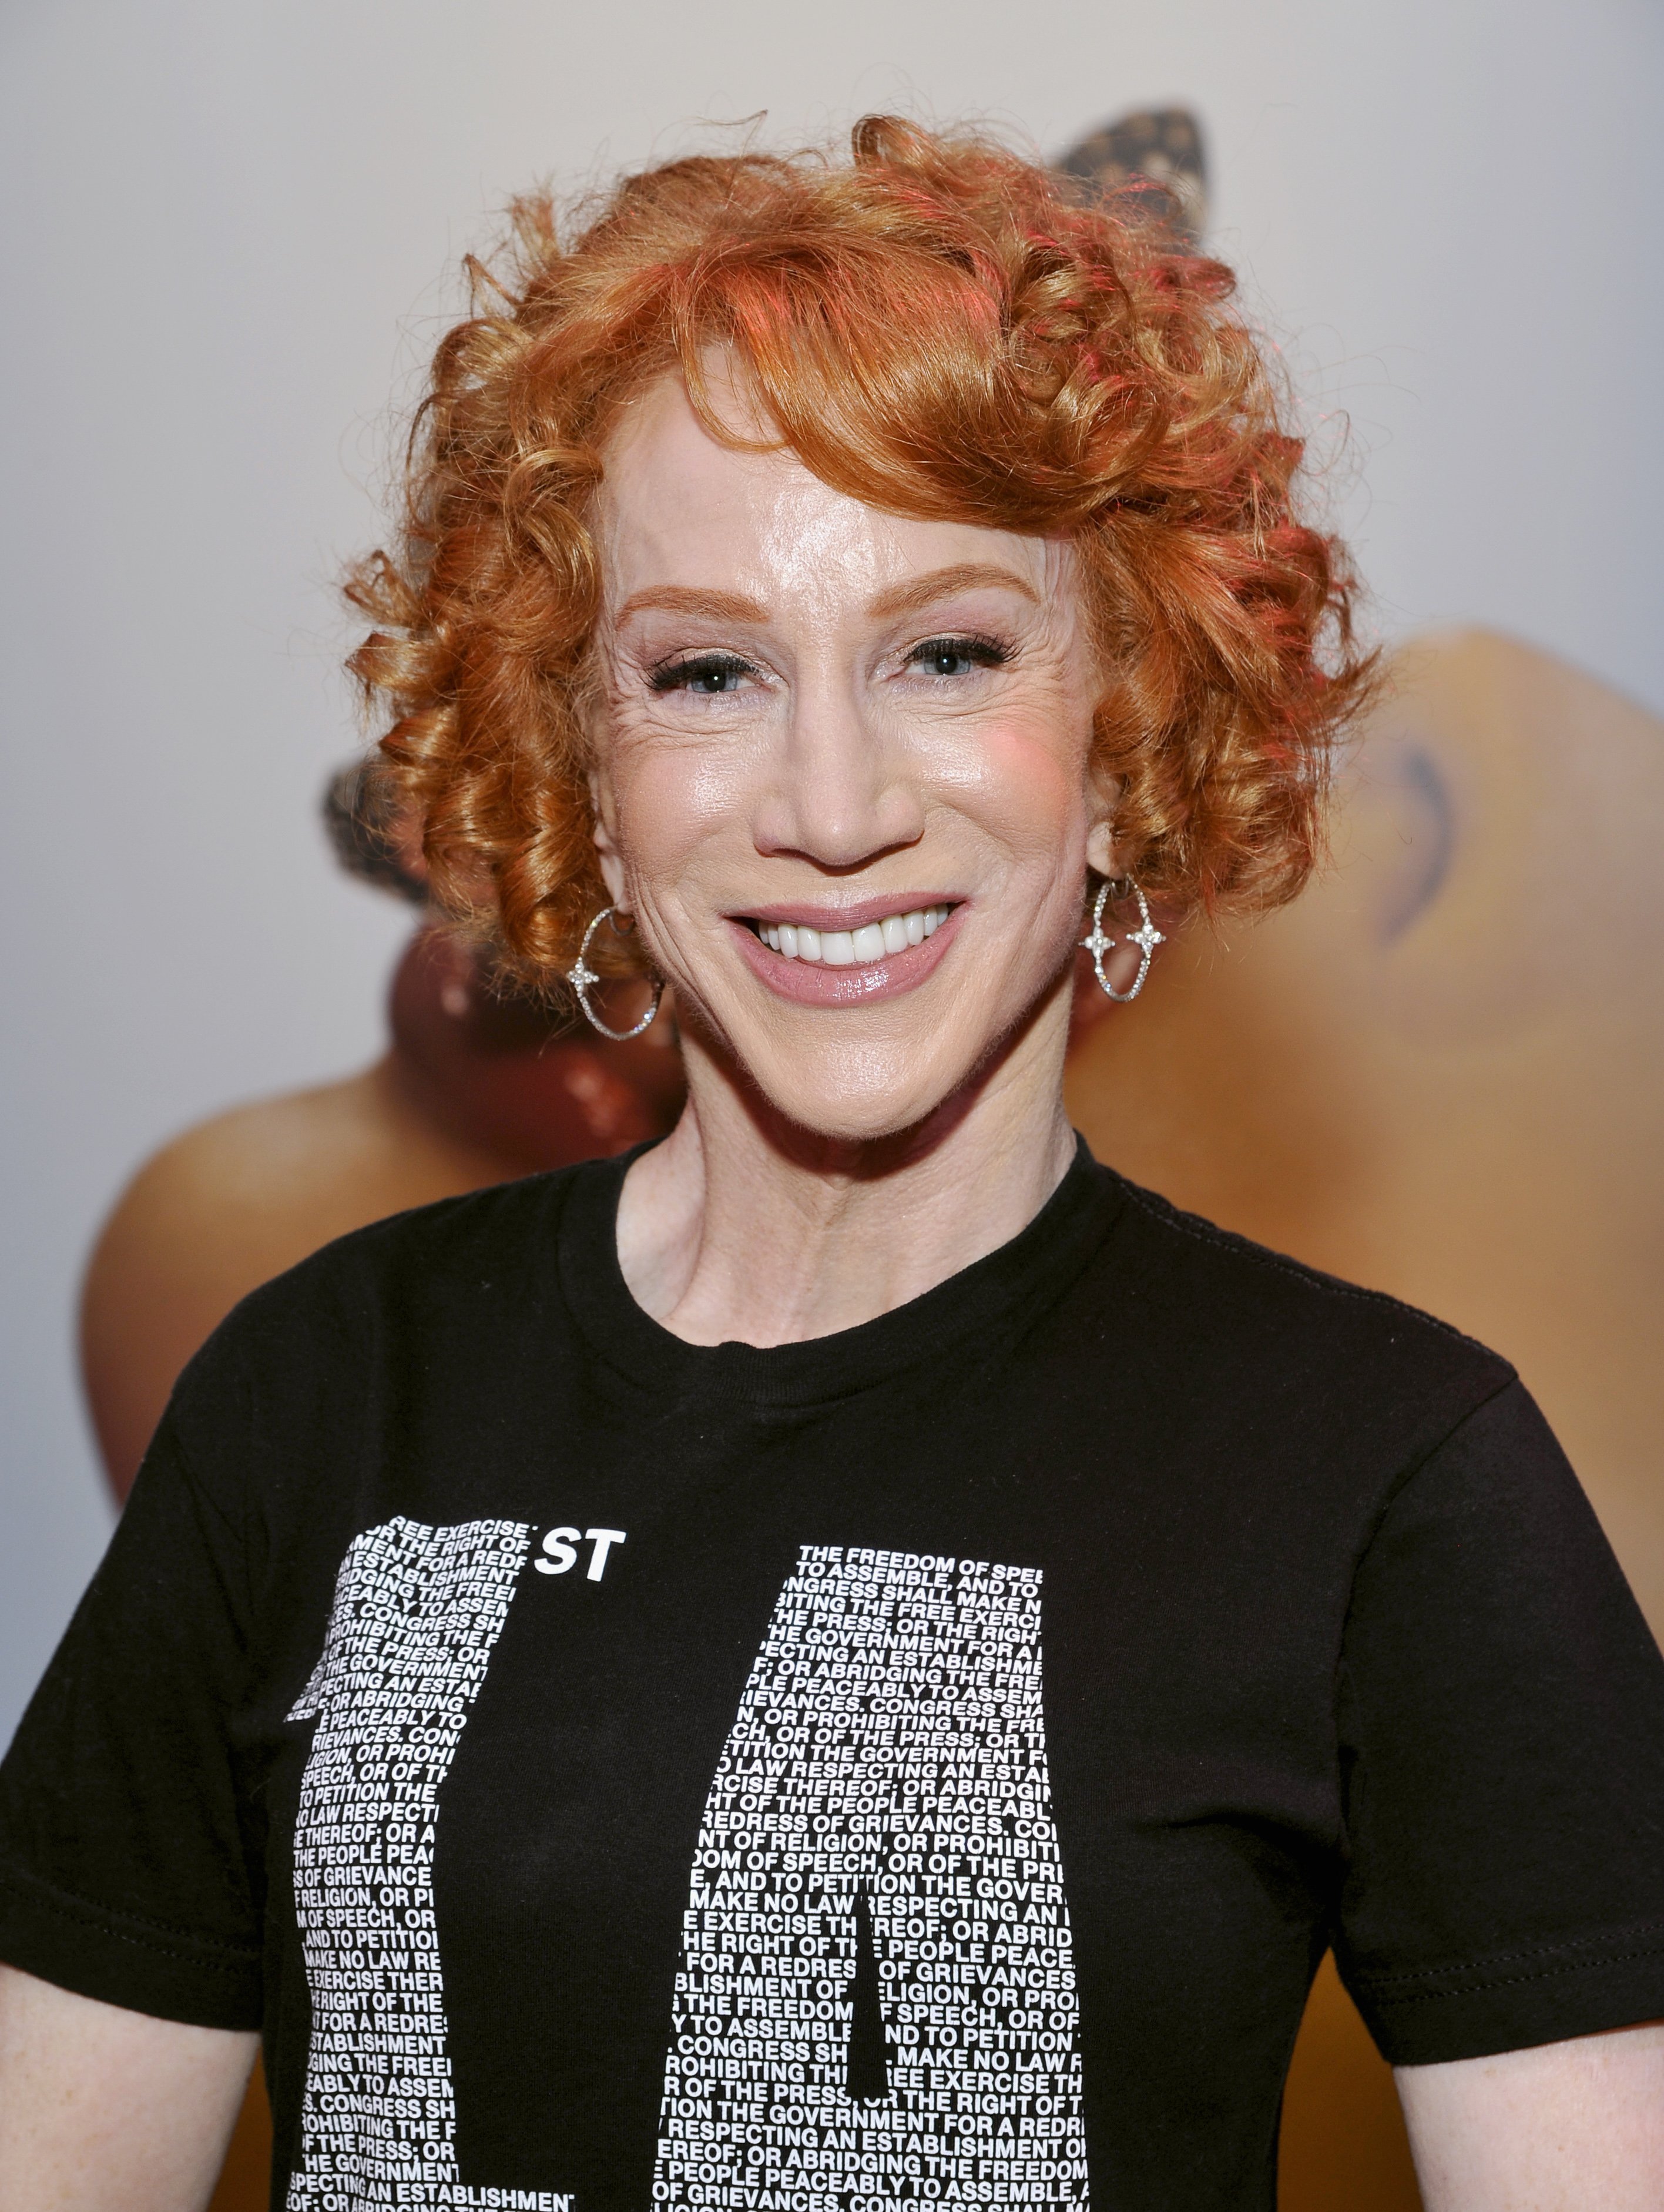 Kathy Griffin attends Roxane Gay in conversation in Los Angeles, California on May 11, 2019 | Photo: Getty Images